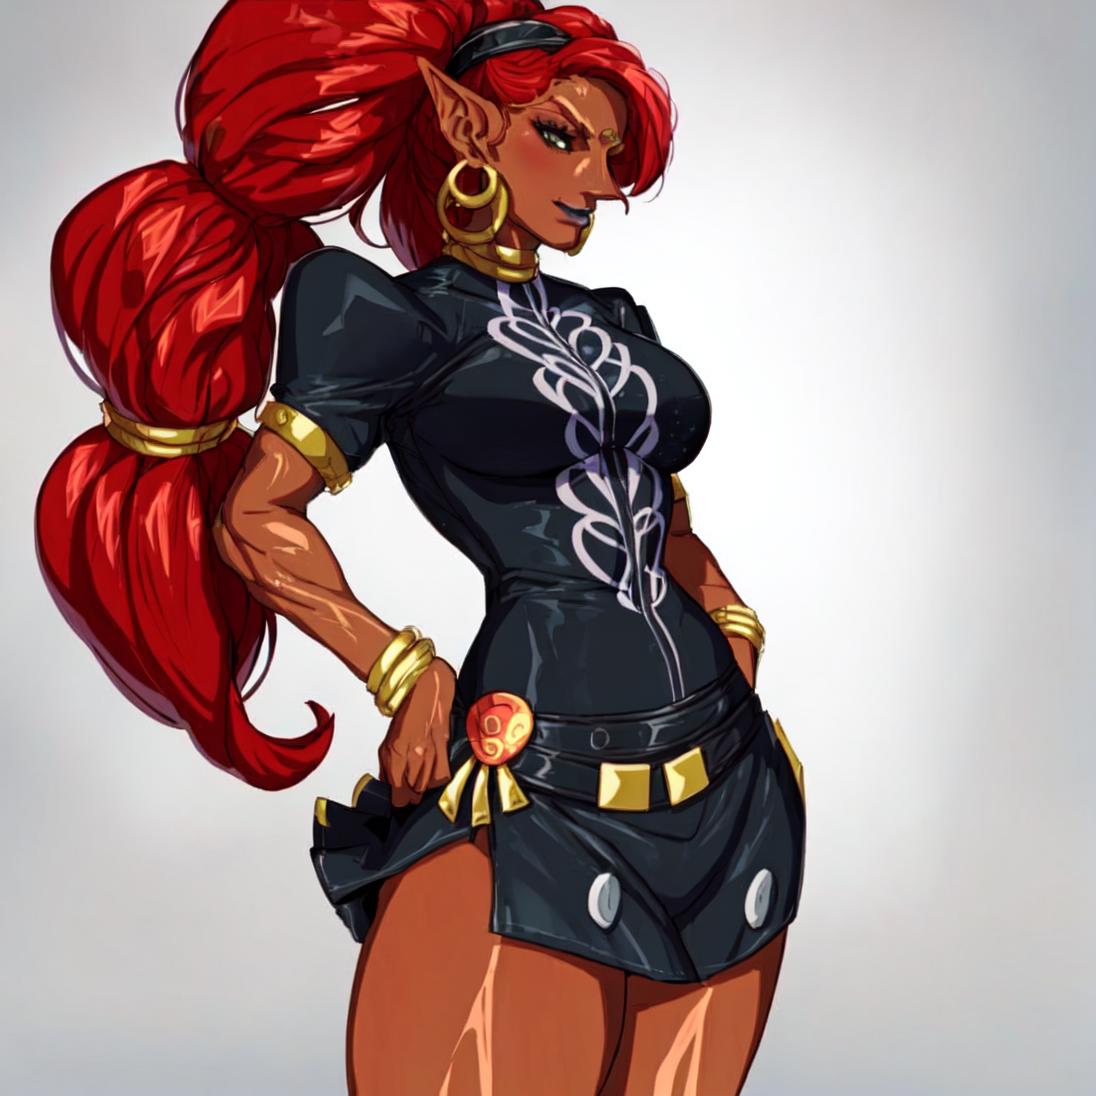 Urbosa image by objaction